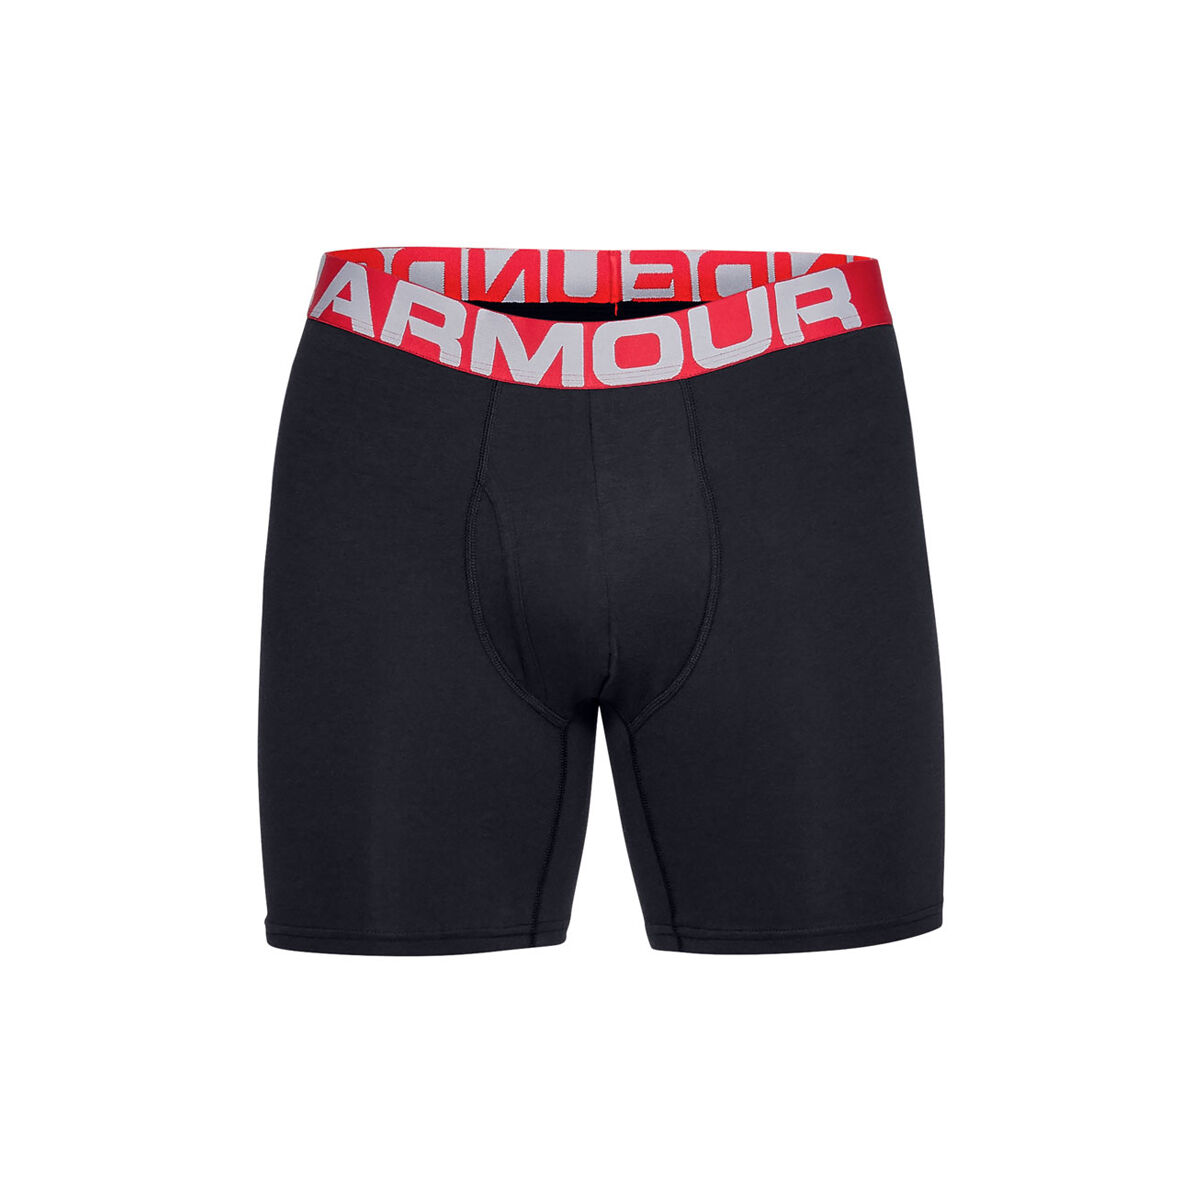 Under Armour 3-Pack Grey Cotton Stretch BoxerJock Mens Gray